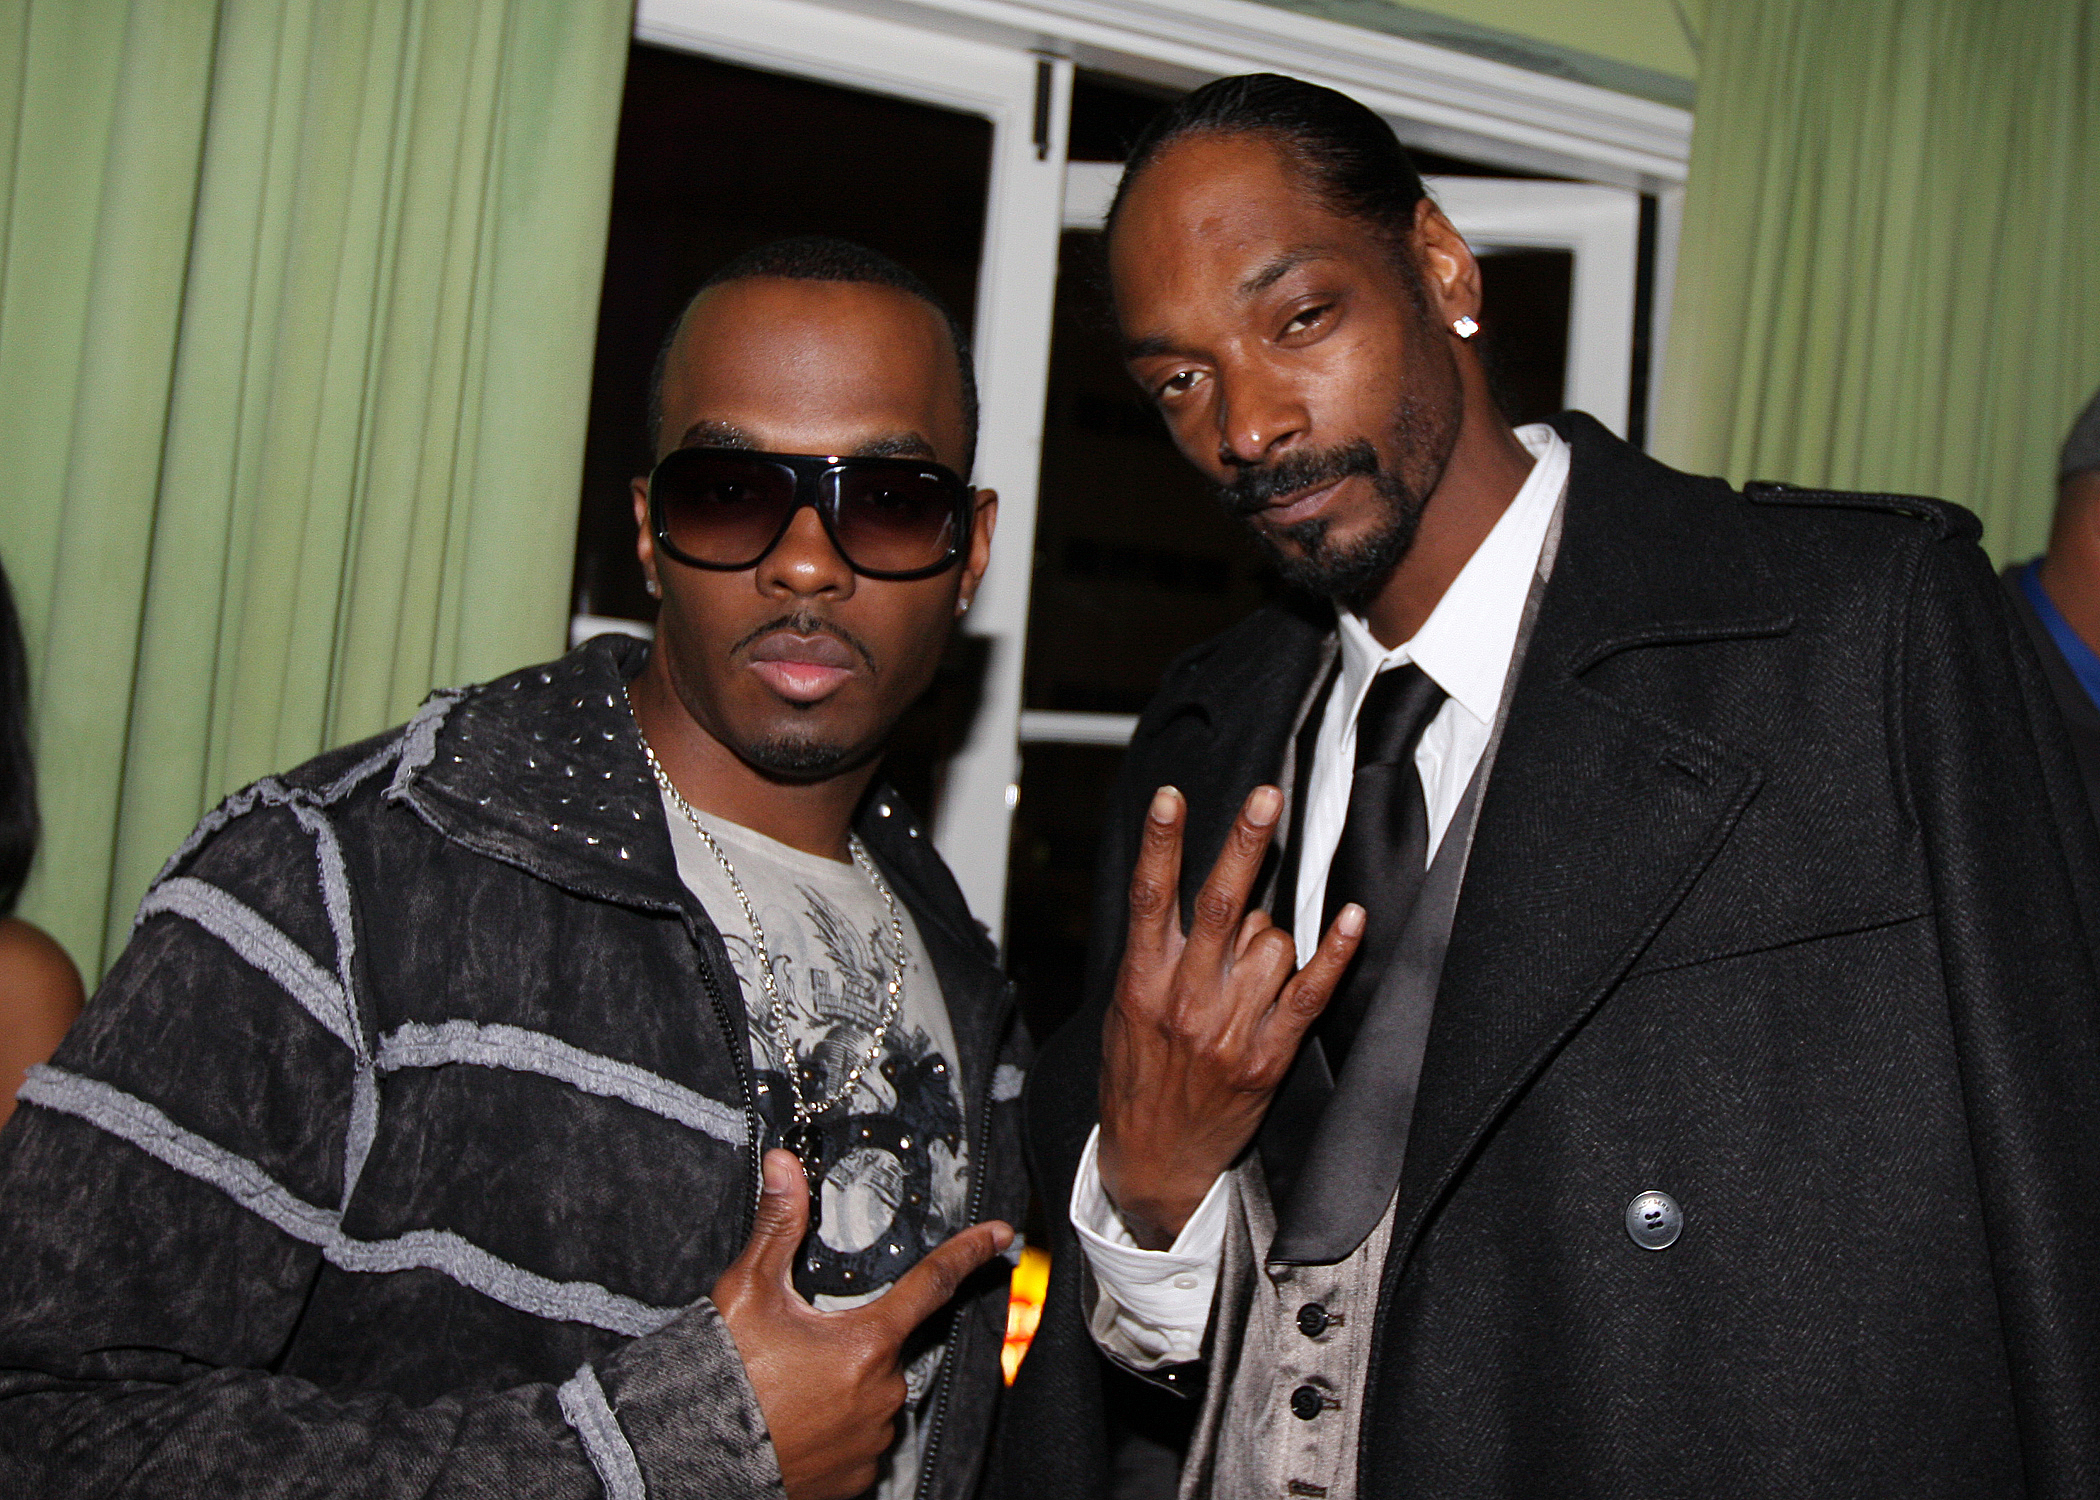 Marques T. Owens with Snoop Dogg at exclusive afterparty event